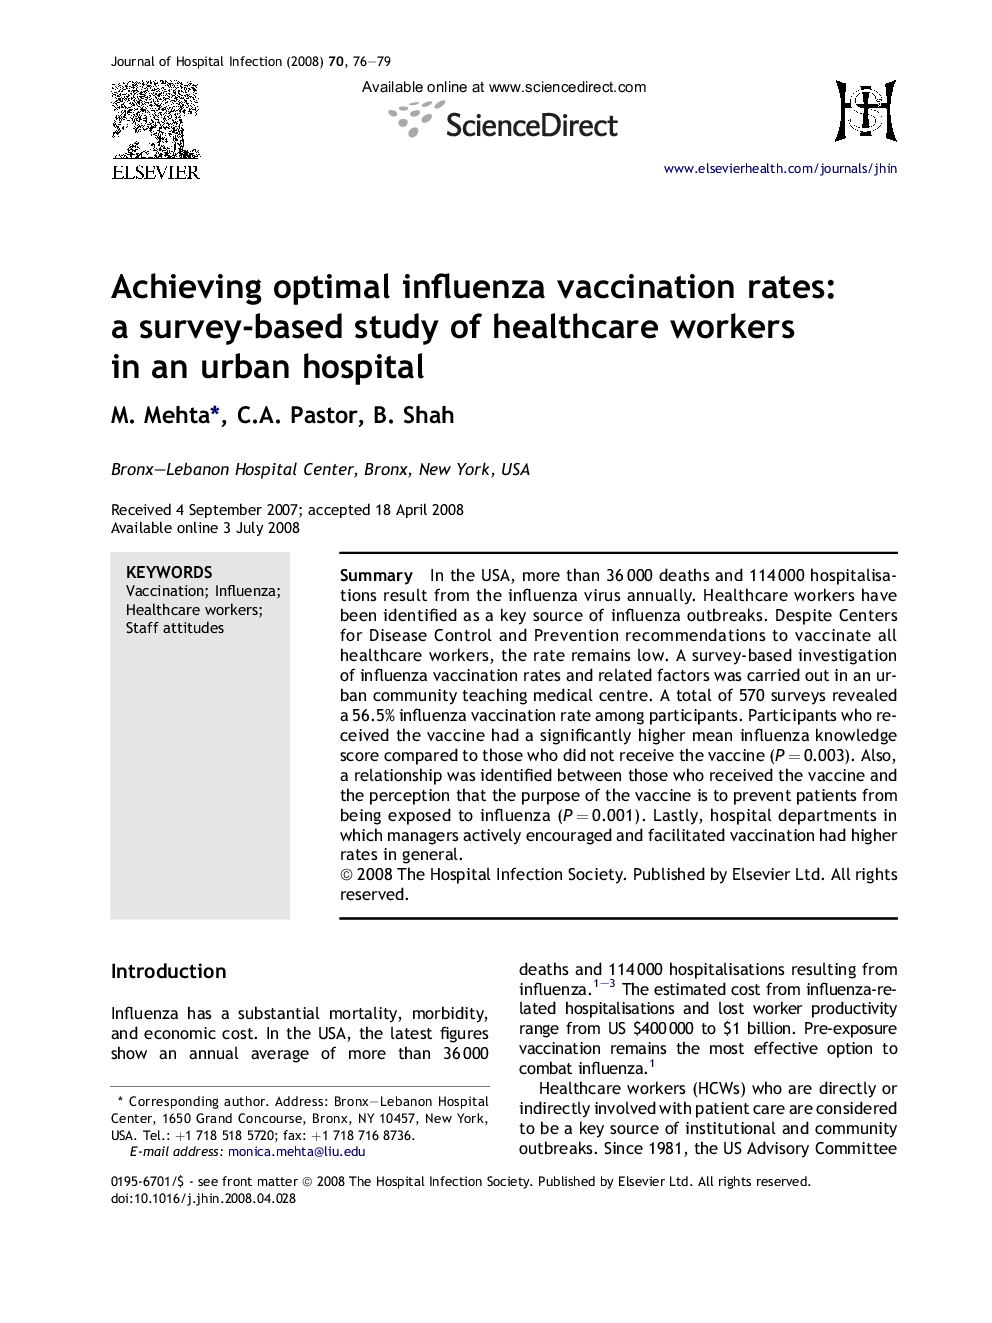 Achieving optimal influenza vaccination rates: a survey-based study of healthcare workers in an urban hospital